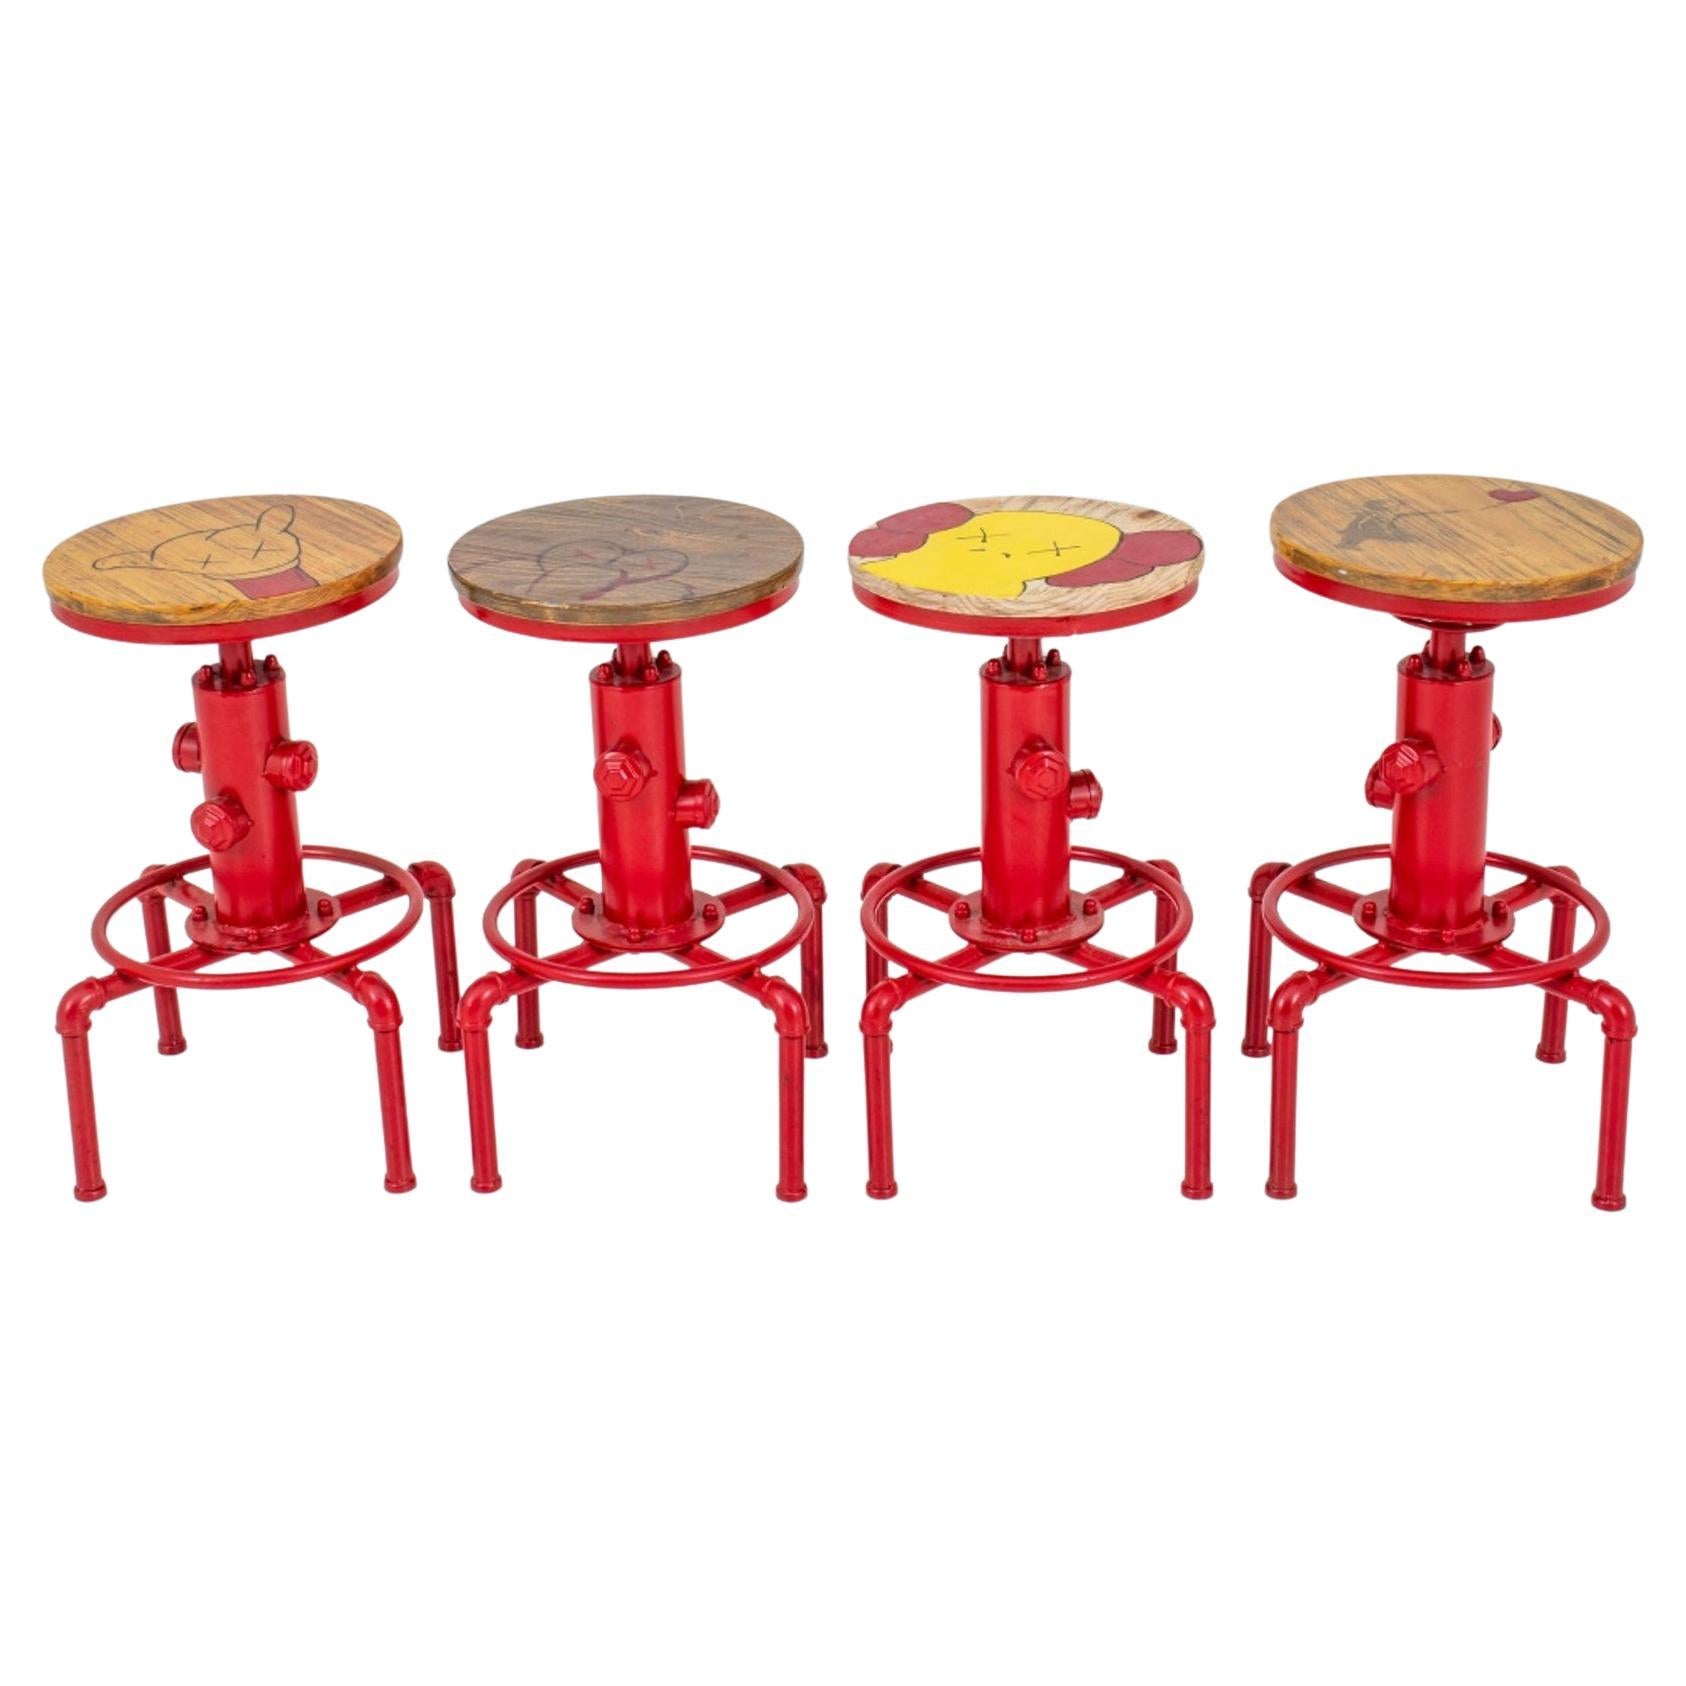 American Industrial "Outsider Art" Stools, Set of 4